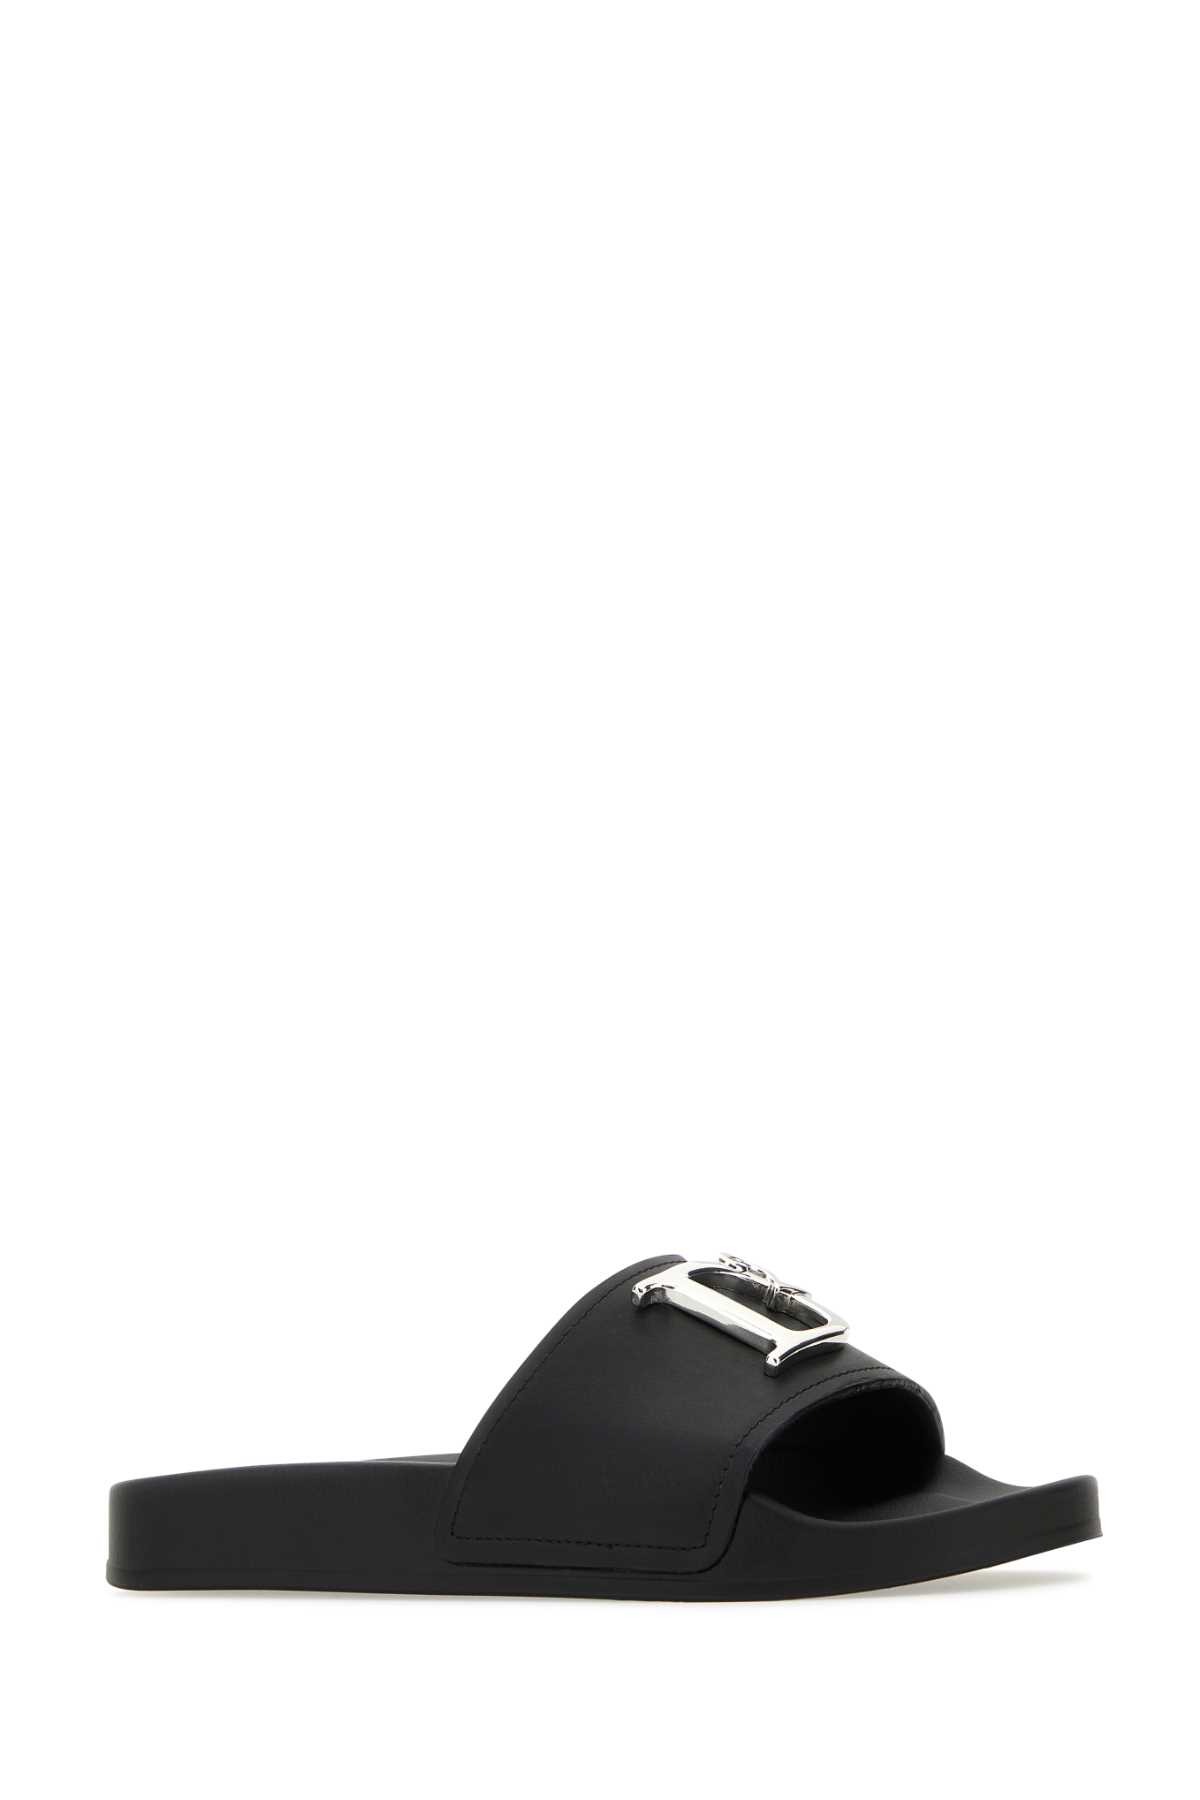 Shop Dsquared2 Black Leather D2 Statement Slippers